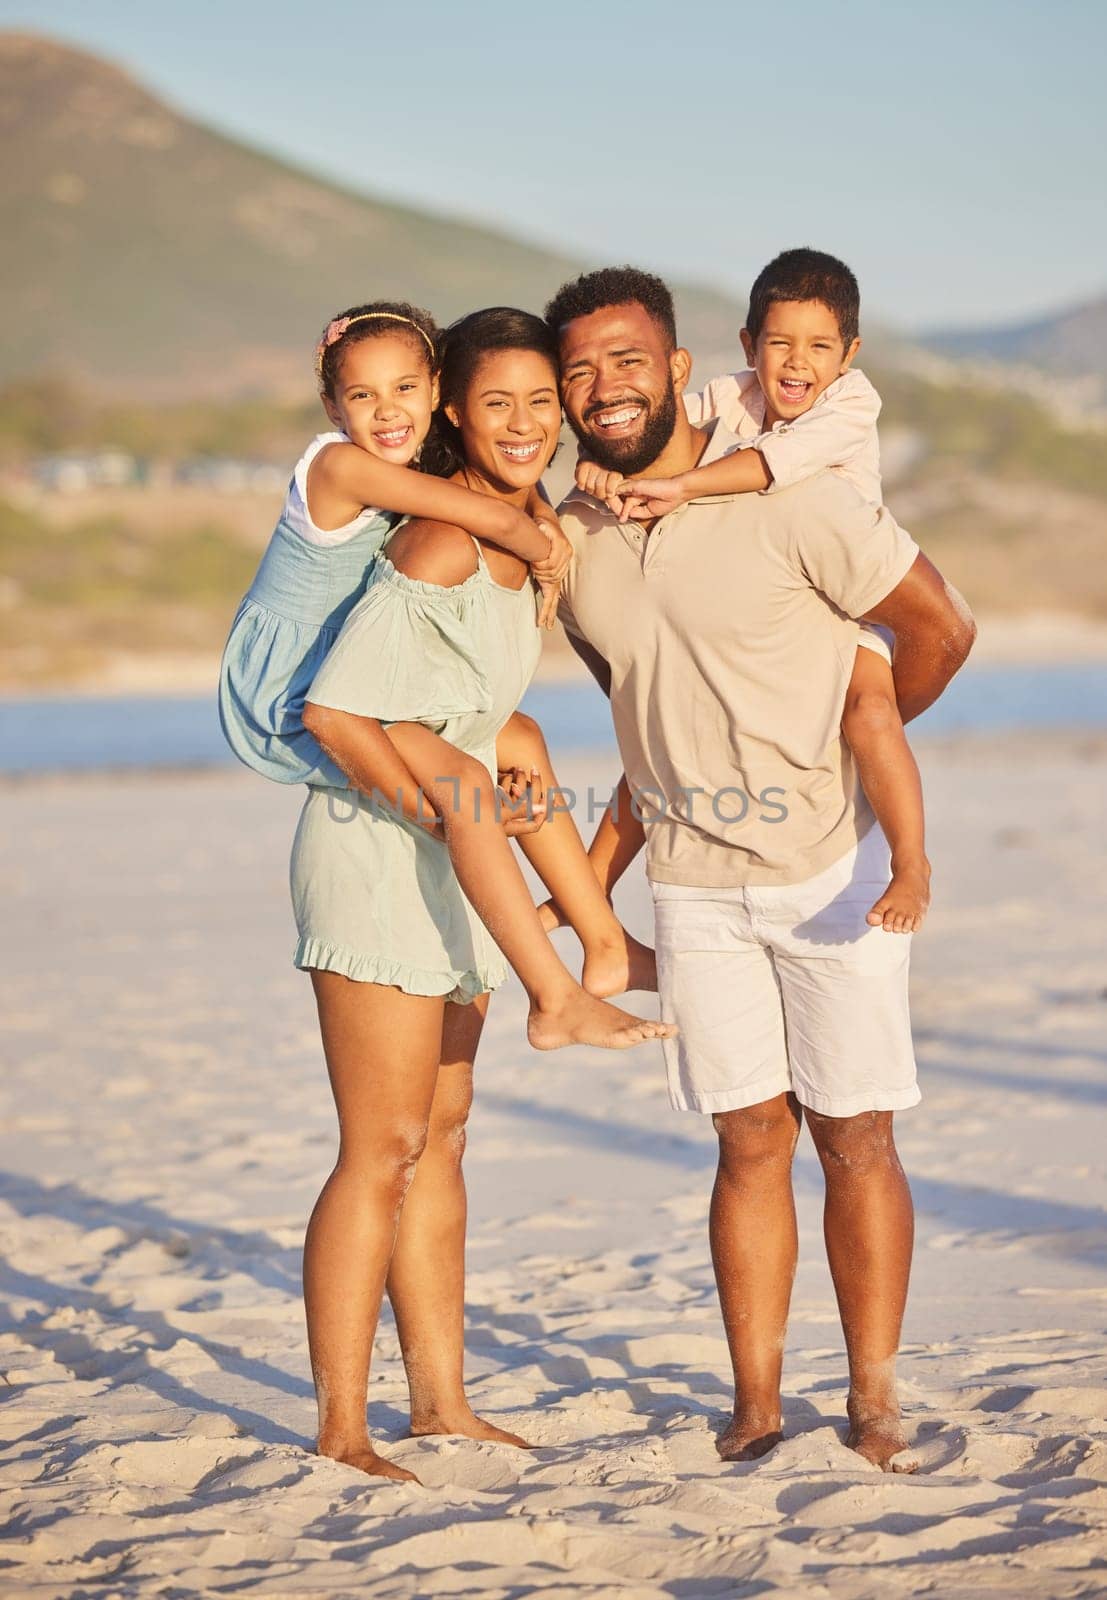 Mother, father or portrait of happy kids at beach to travel with a smile, joy or love on holiday vacation. Mom, piggyback or dad with children as a family in Mexico with wellness bonding together.